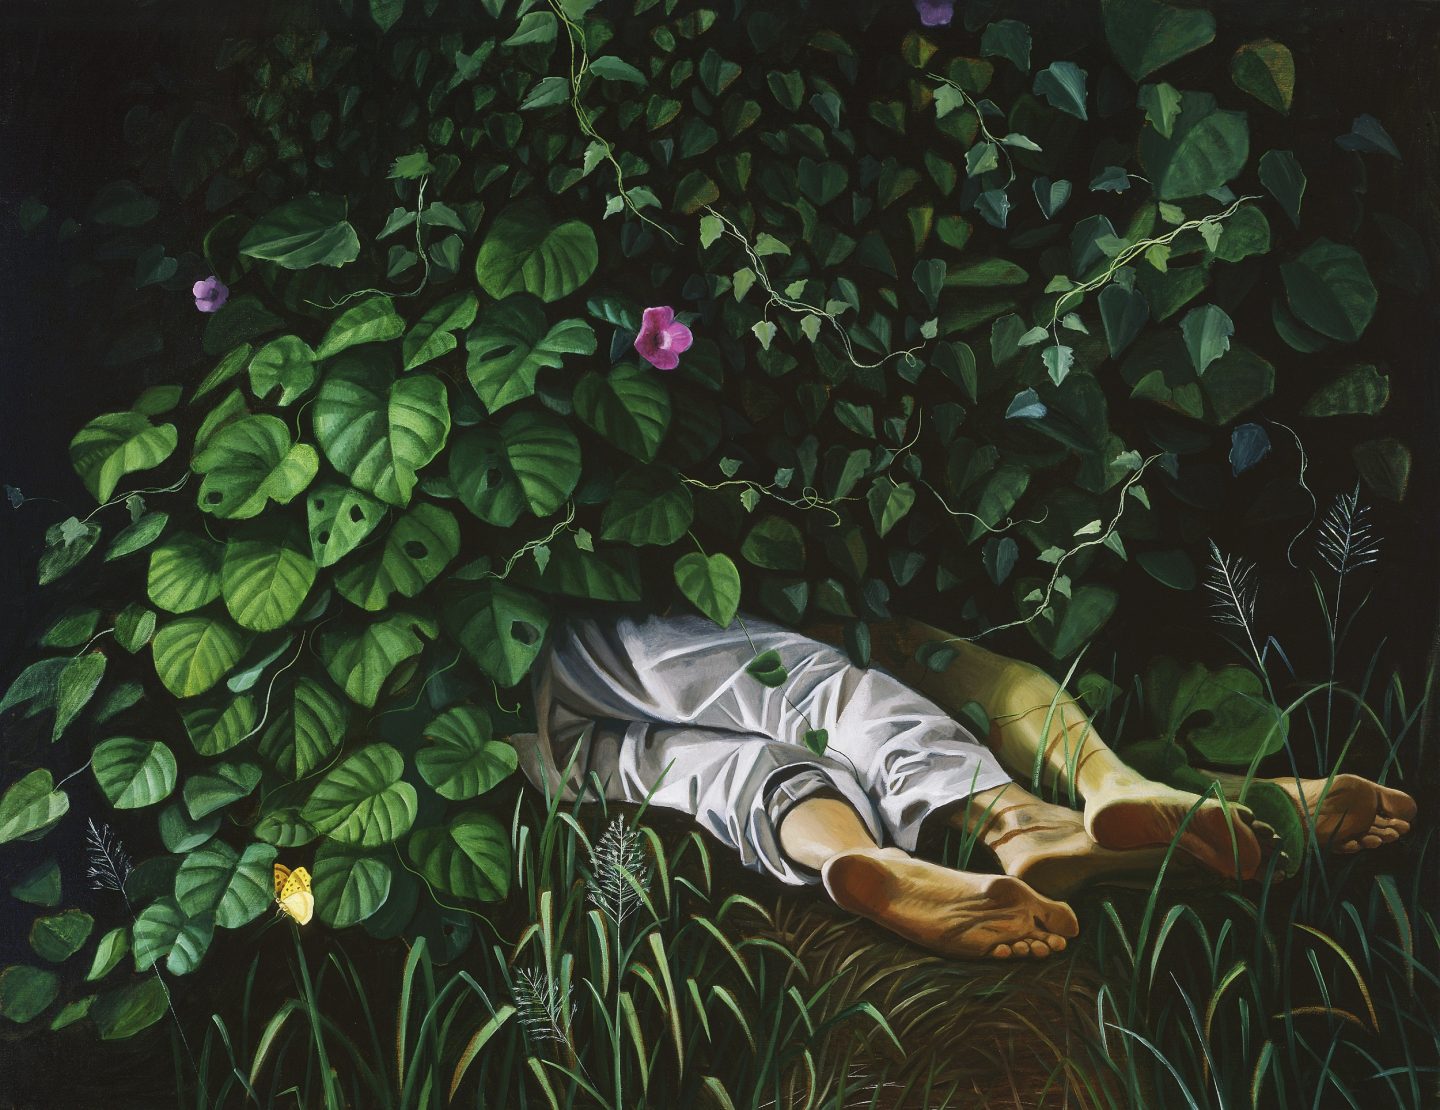 Anne Wallace, Morning Glory 2004, oil on canvas.